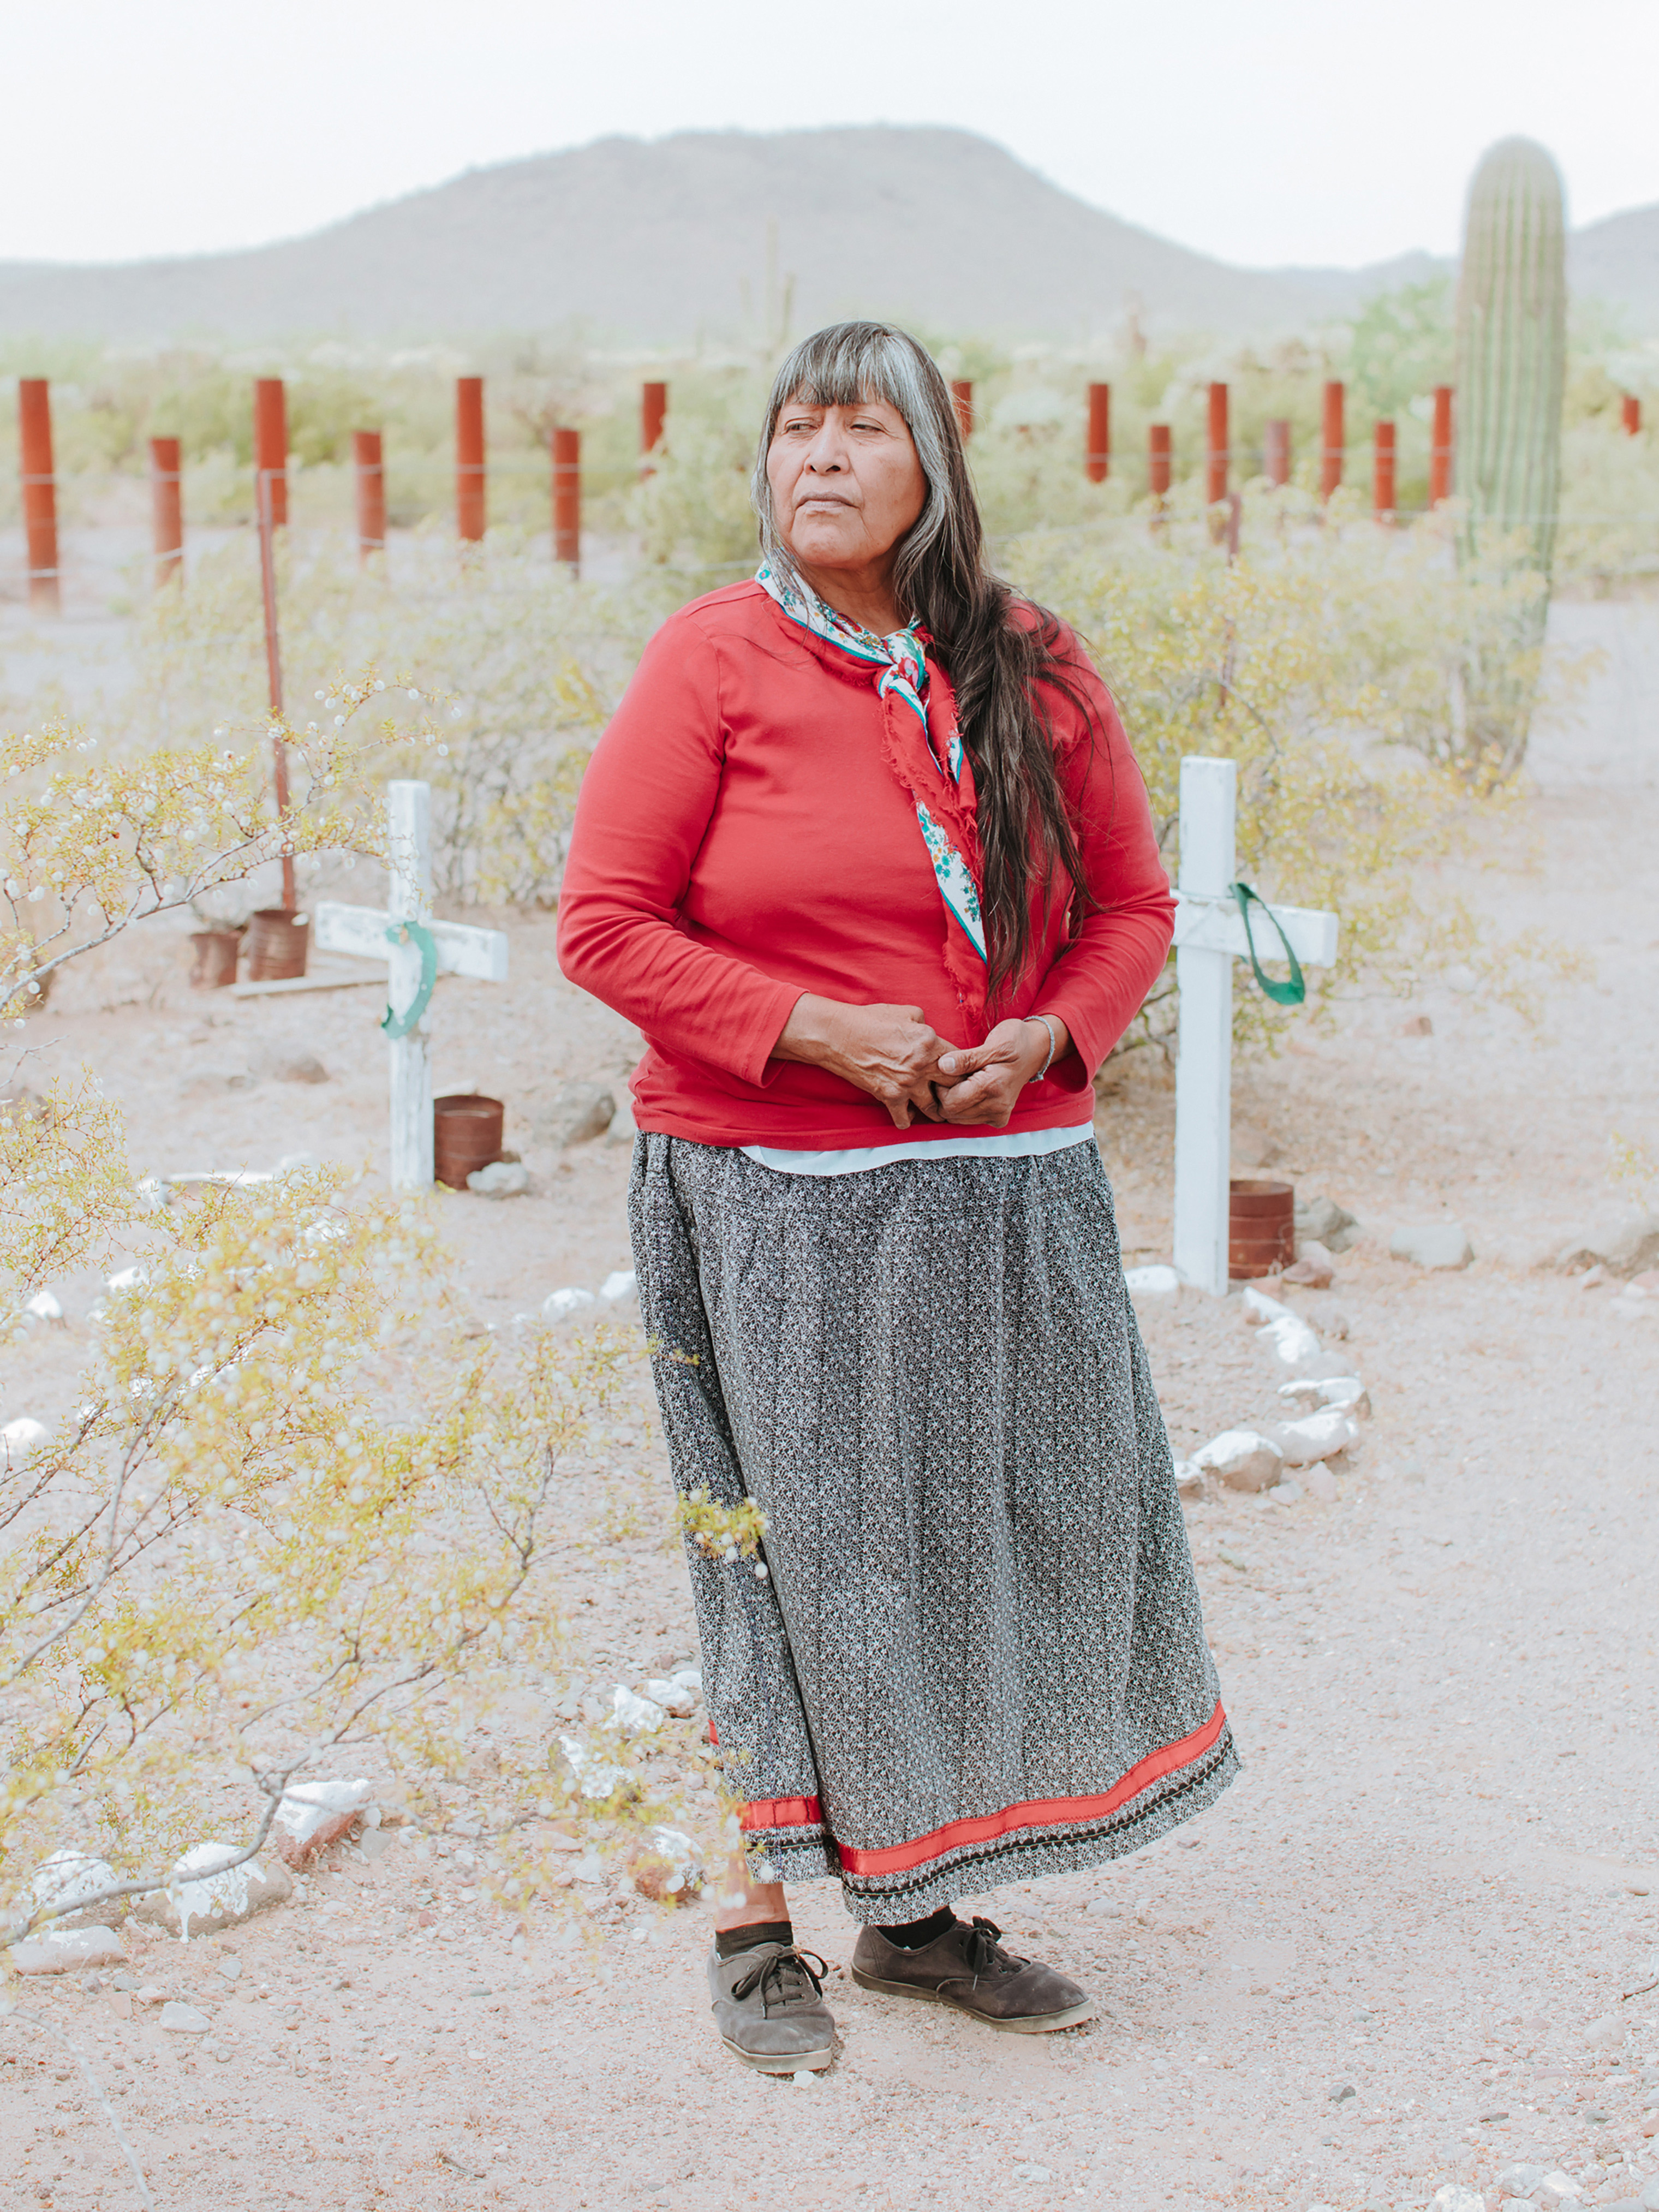 Ofelia Rivas poses in front of crosses her father made, marking the graves of two migrants who died from dehydration years before she was born in Tohono O'odham Nation, Ali Jek, Ariz. (Elliot Ross)